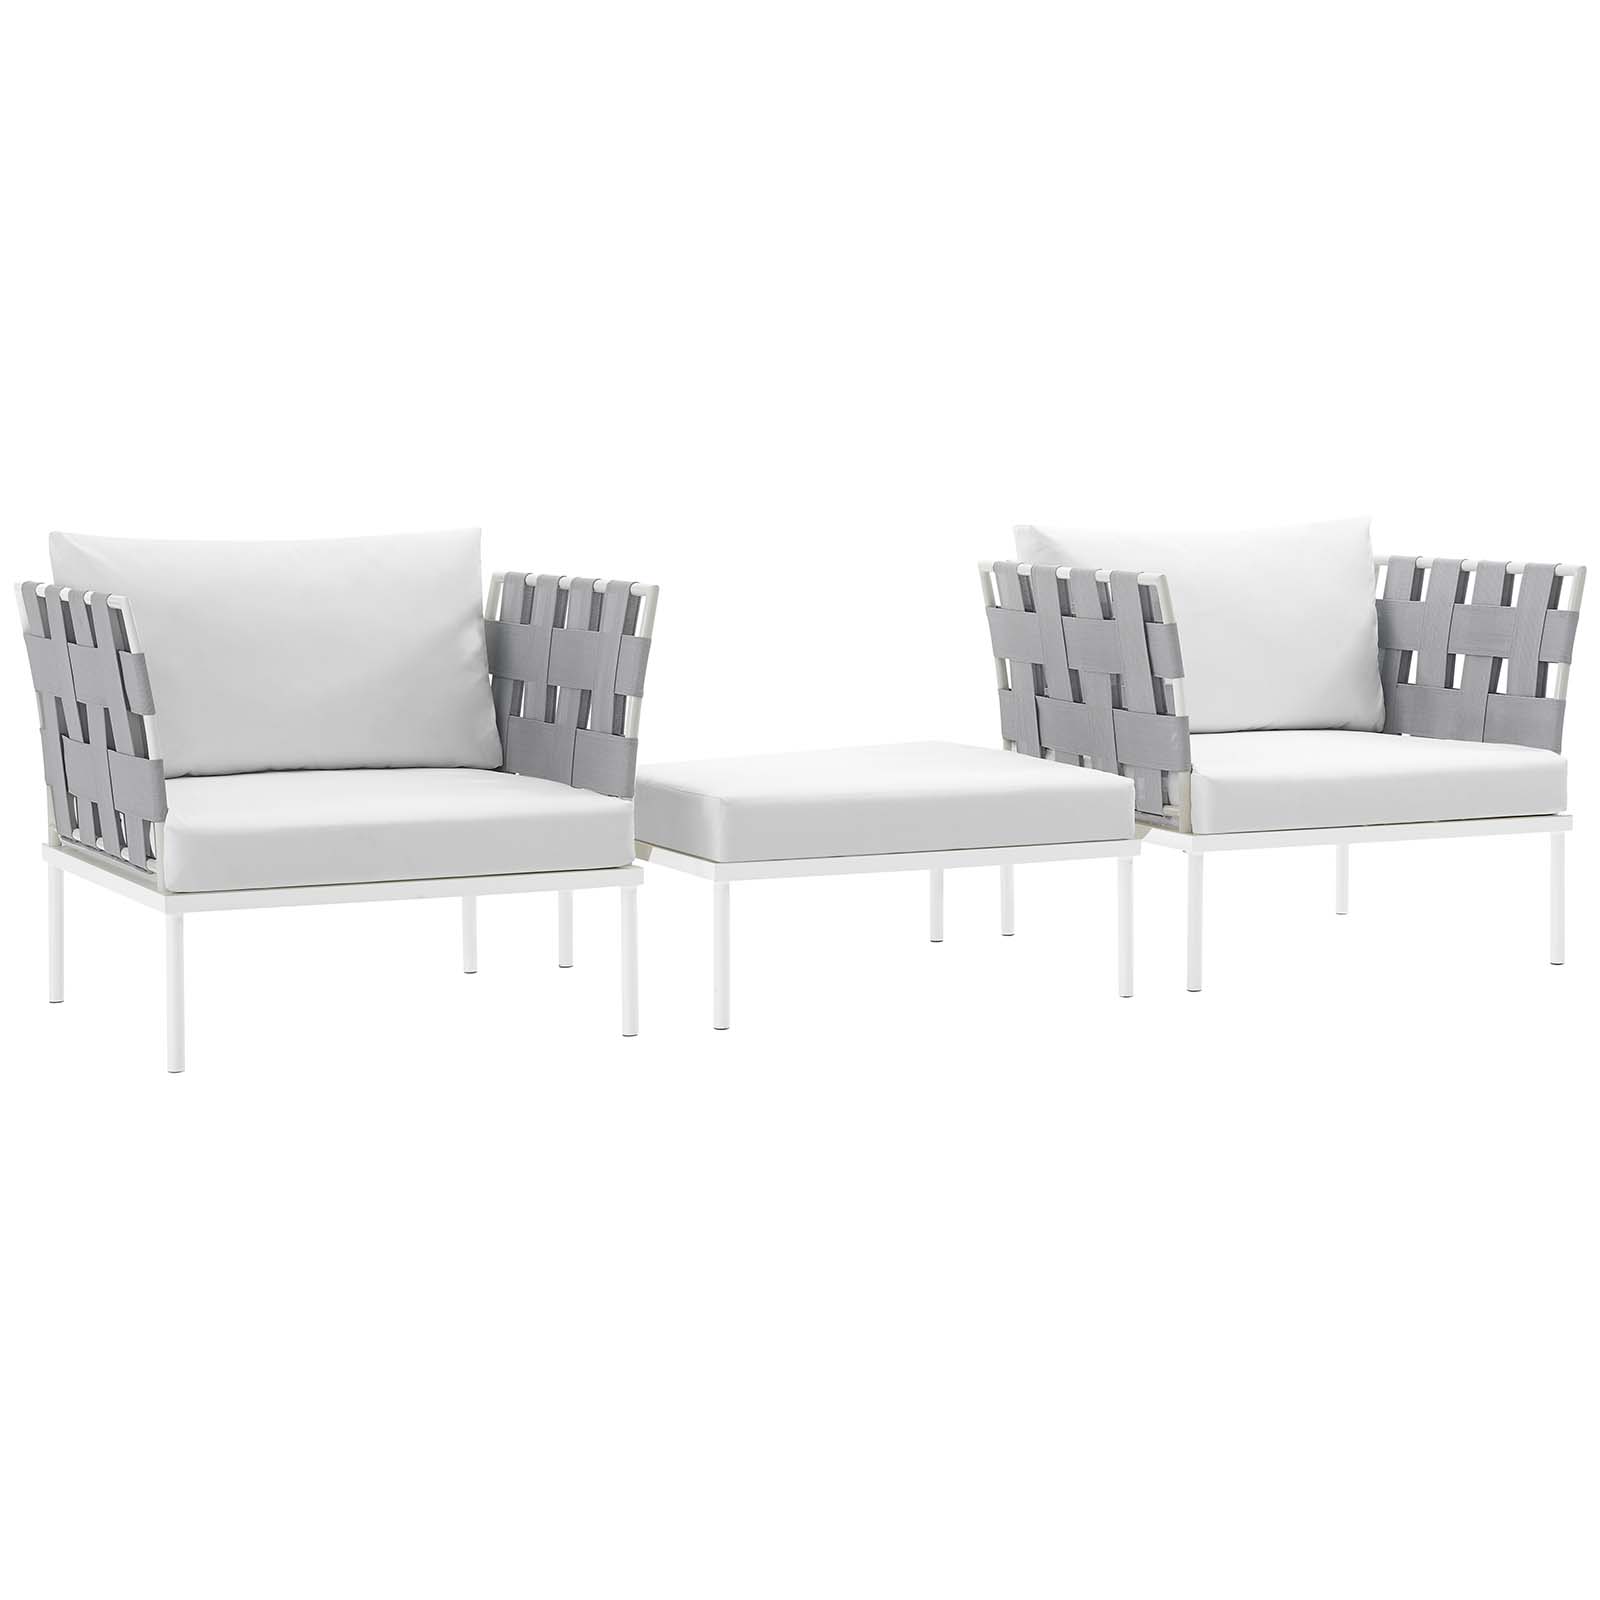 Modern Contemporary Urban Design Outdoor Patio Balcony Three PCS Chairs and Side Table Set, White, Rattan - image 1 of 6